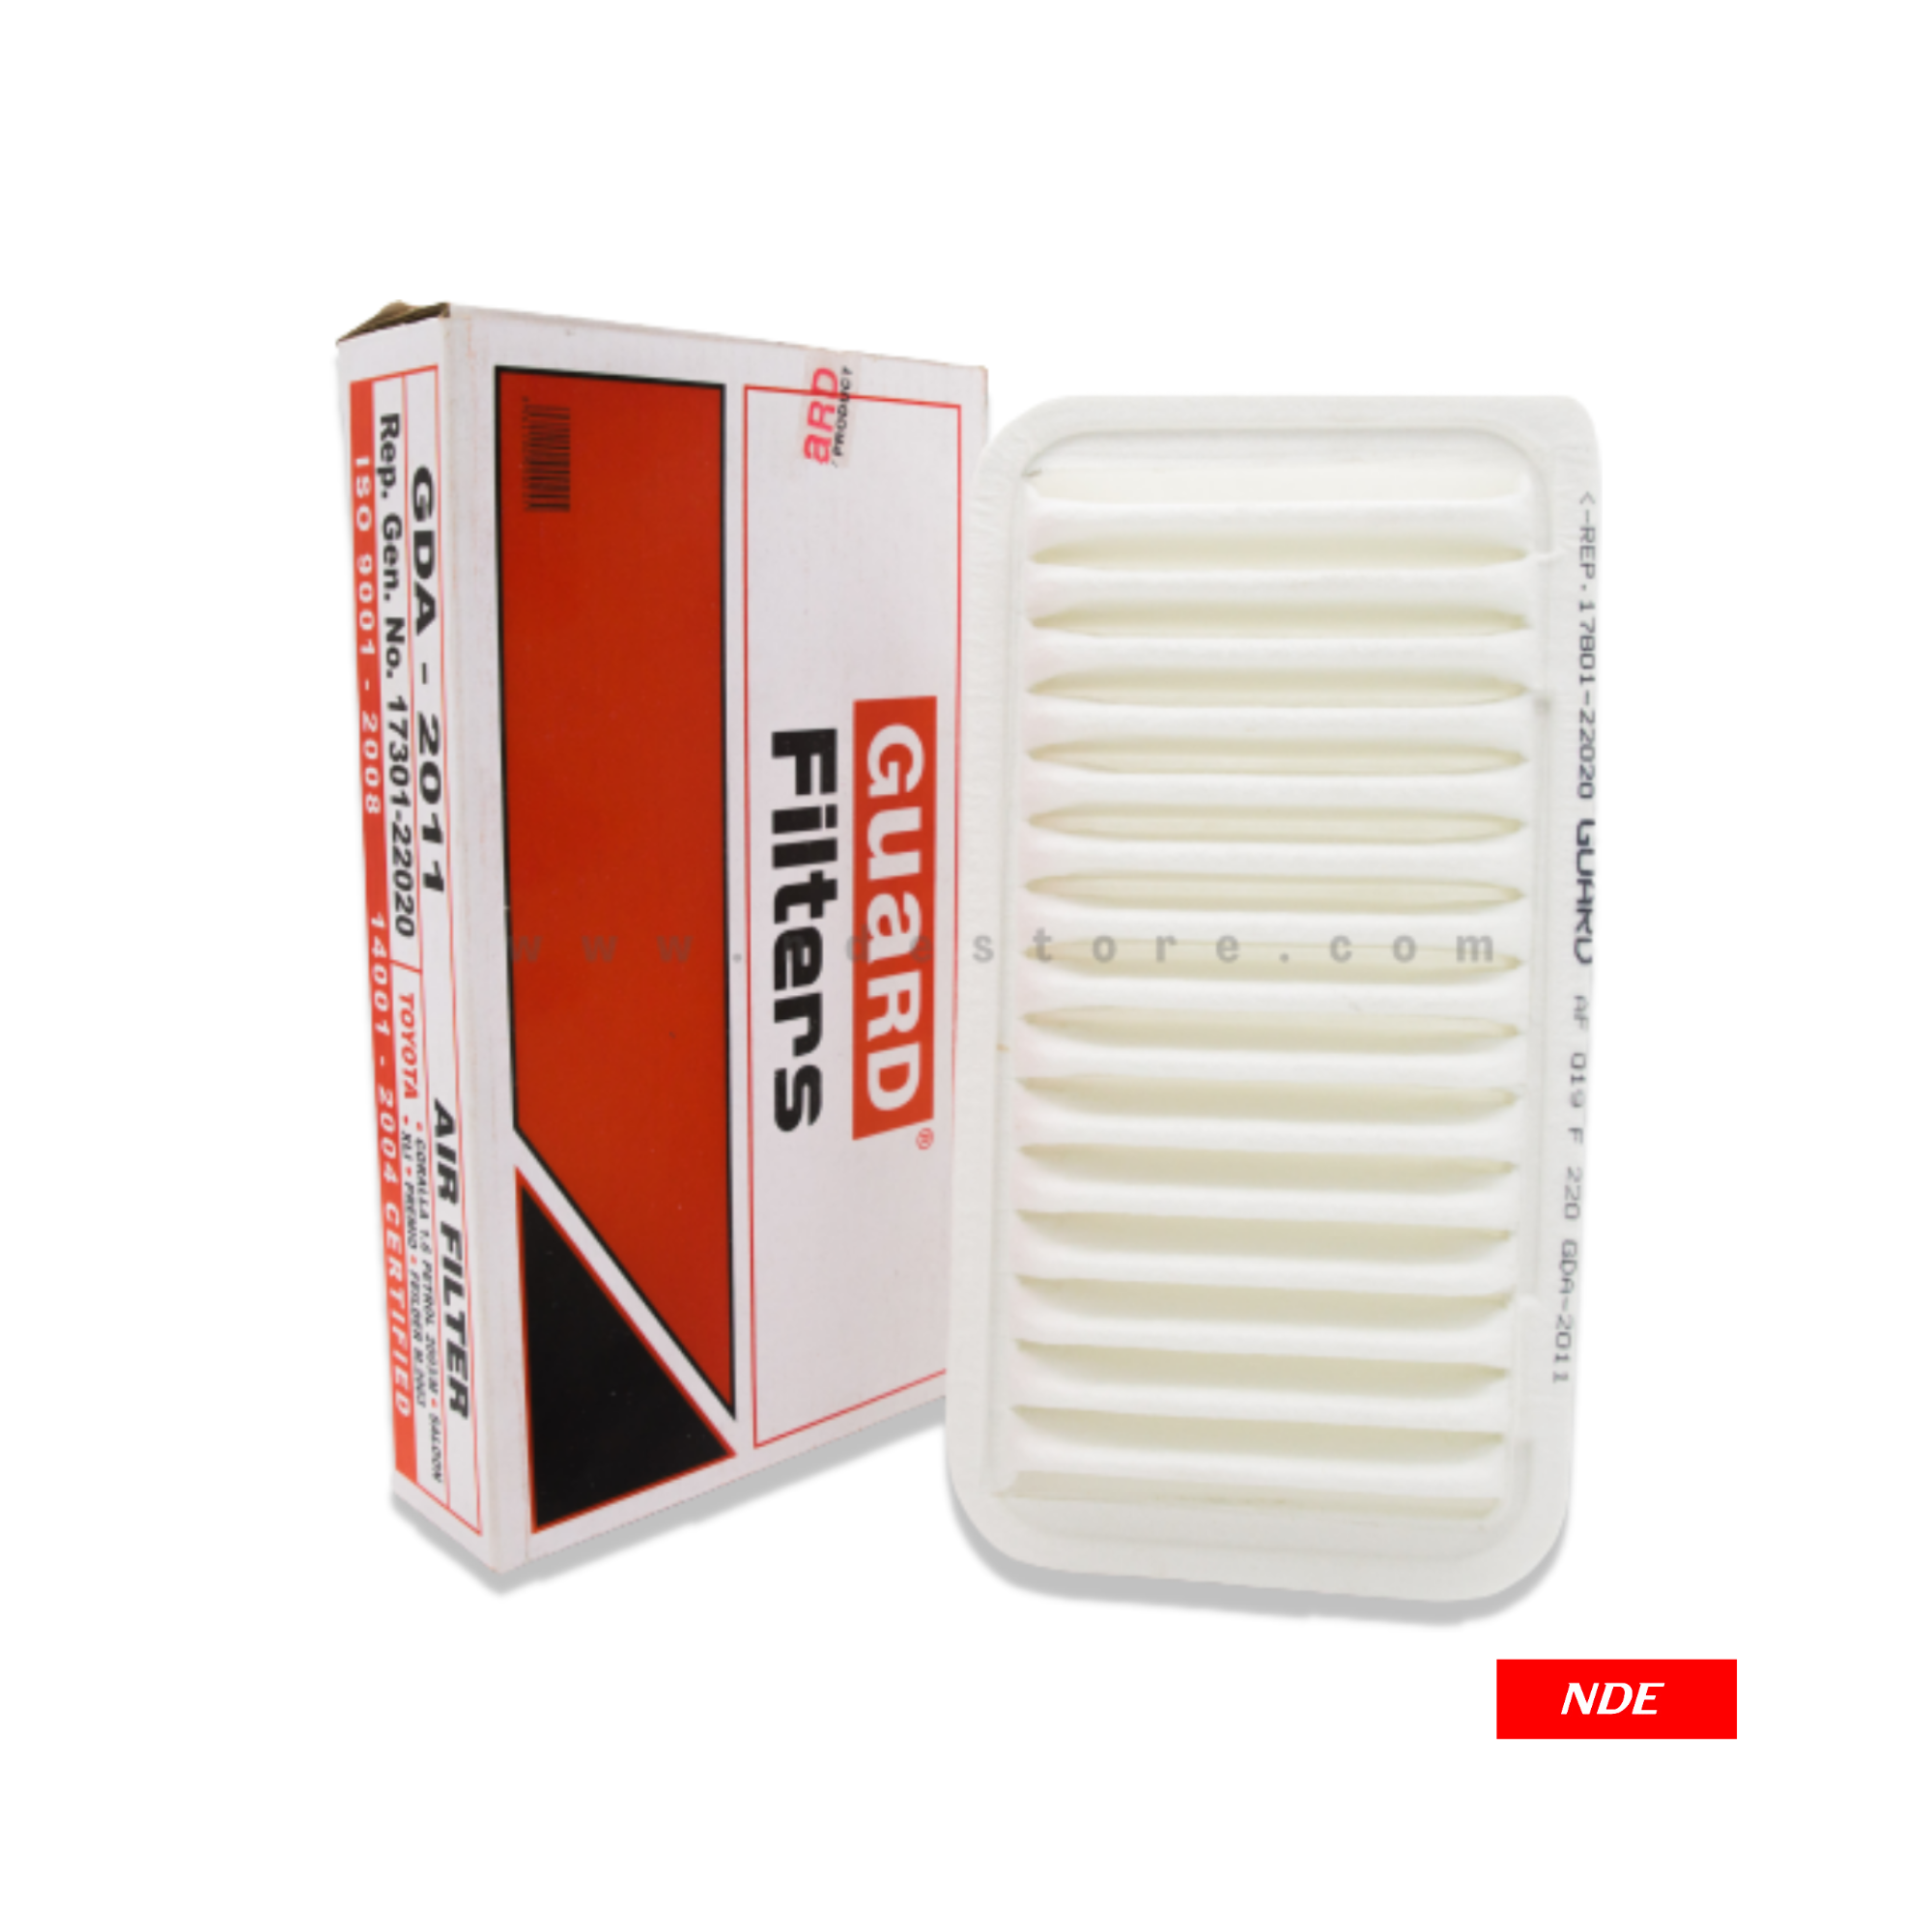 AIR FILTER GUARD FILTER FOR TOYOTA COROLLA (2002-2008)